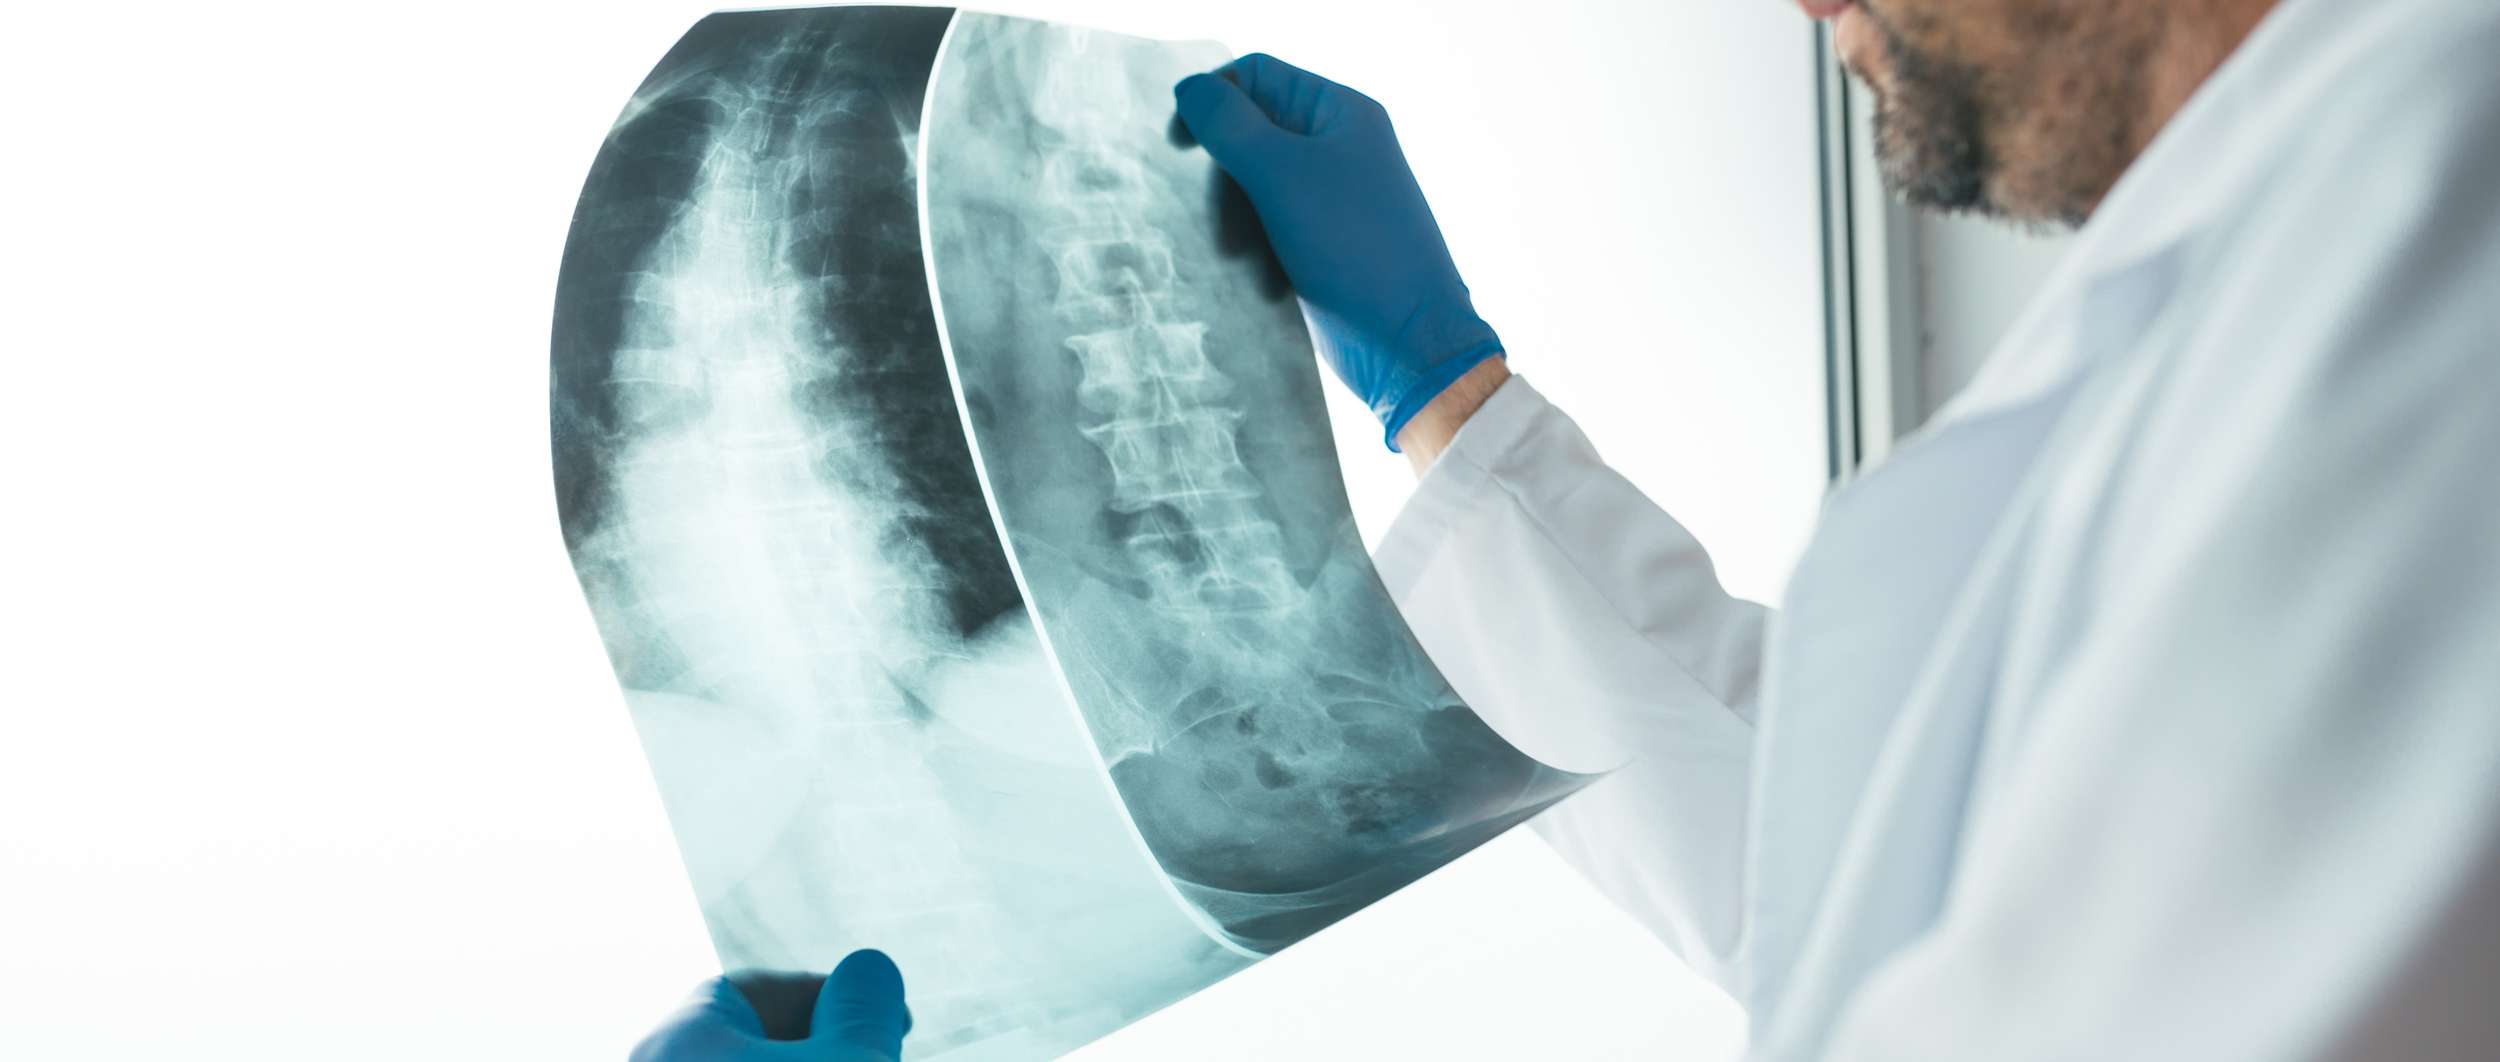 doctor examining x-ray of the human spine